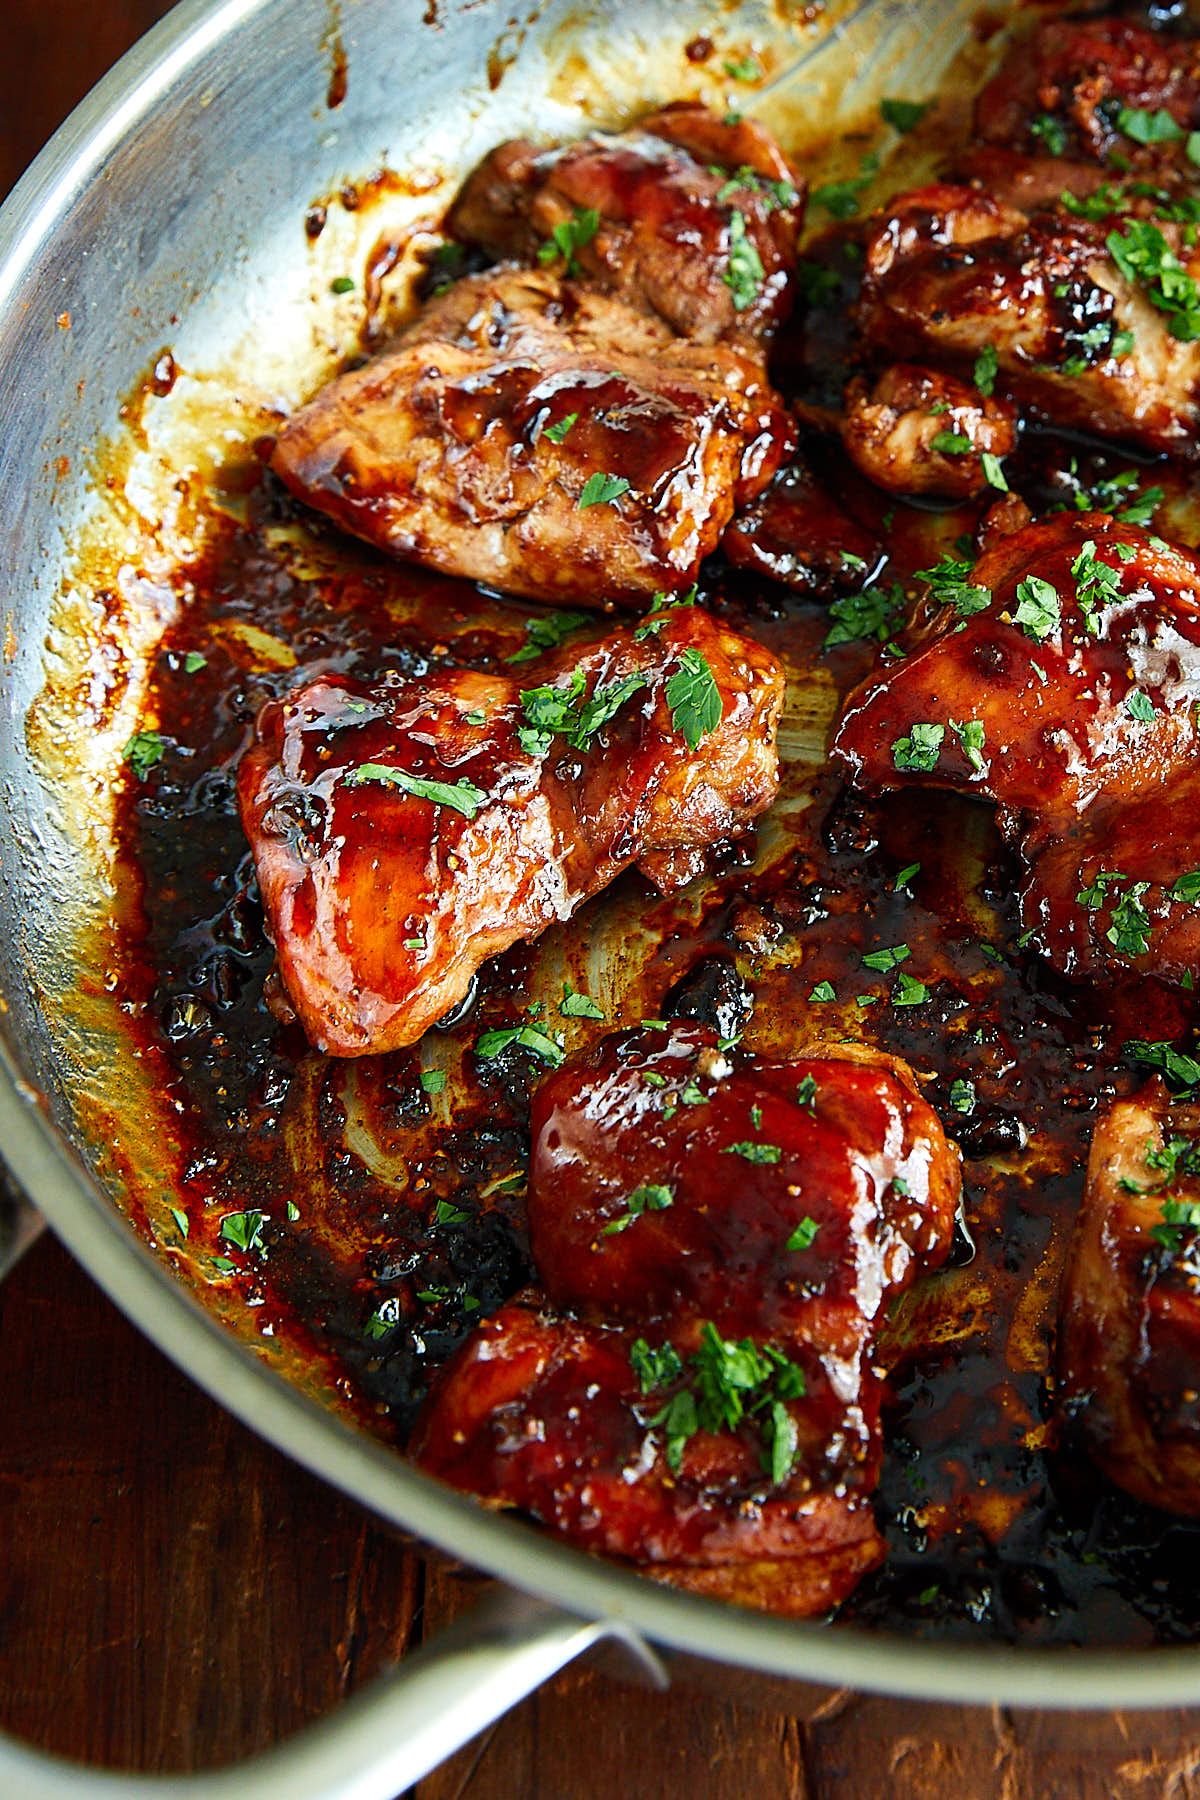 Honey Pomegranate Chicken Thighs Pan Fried Chicken Thighs Glazed In Syrian Honey Pom Honey Chicken Recipe Chicken Thigh Recipes Boneless Chicken Thigh Recipes